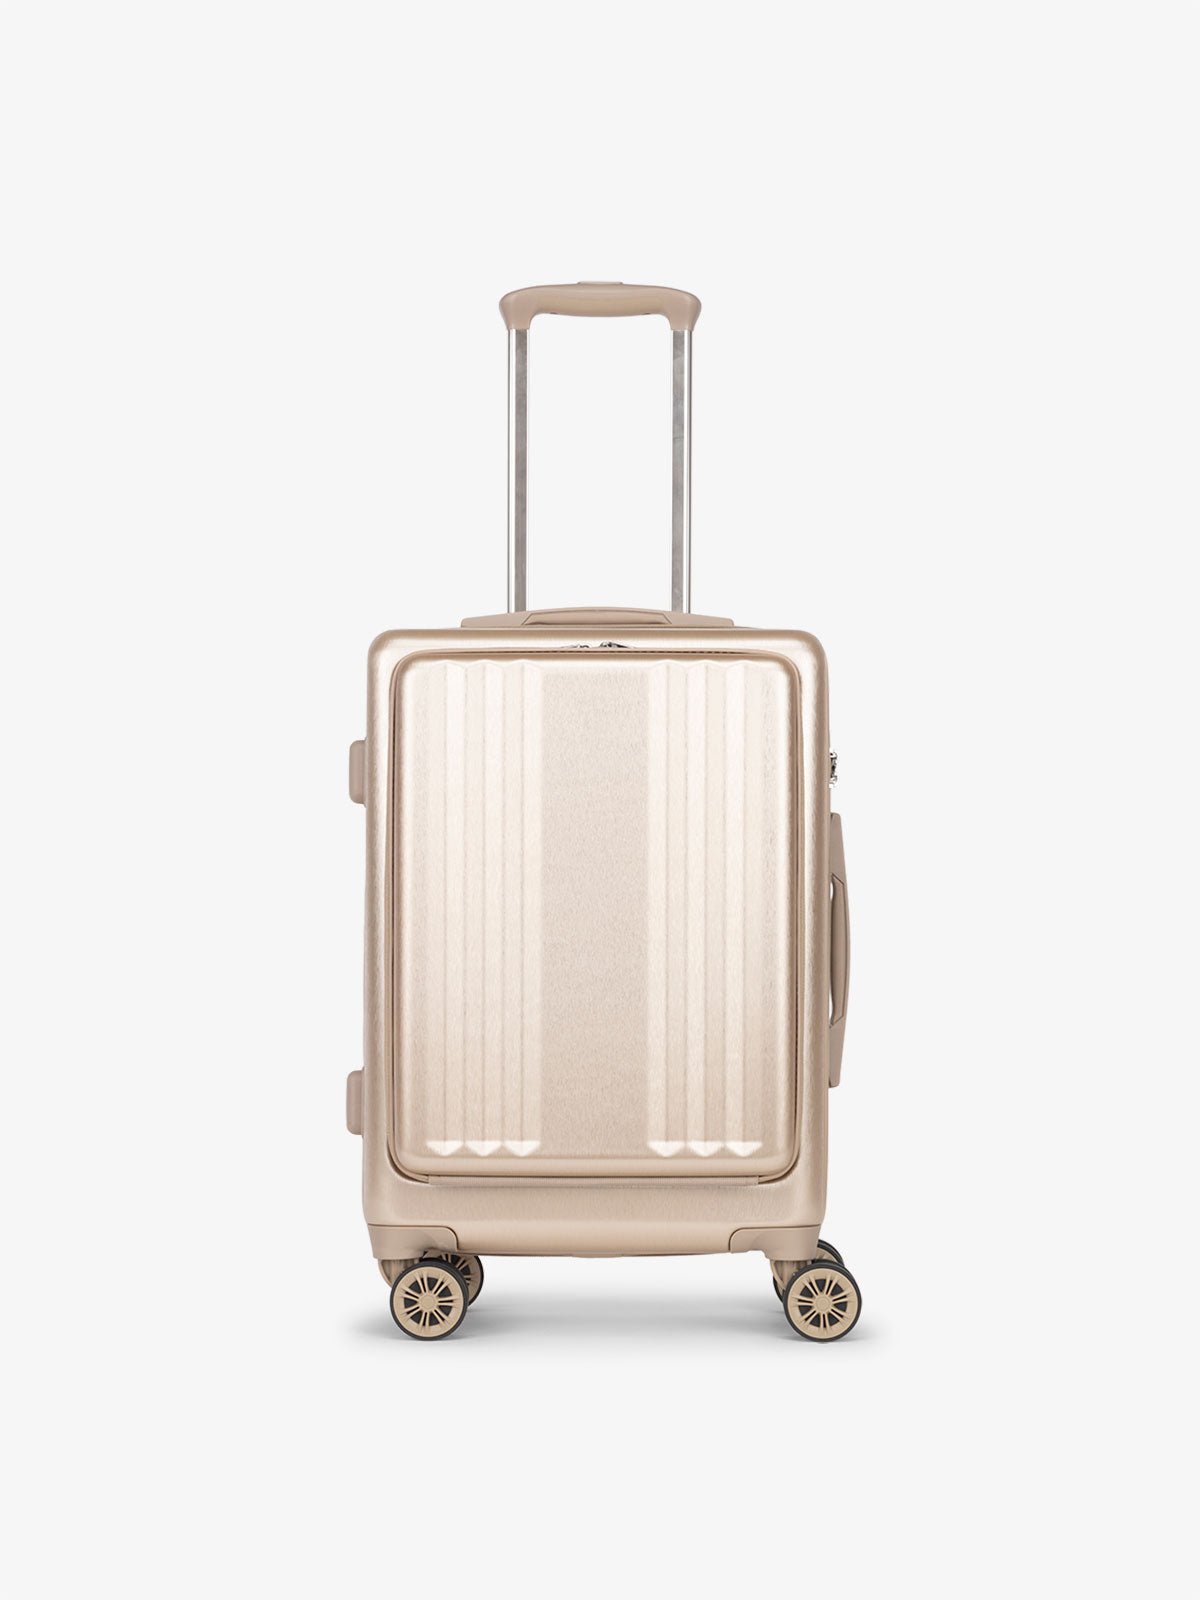 CALPAK Ambeur carry-on suitcase with pocket, TSA lock and 360 spinner wheels in gold